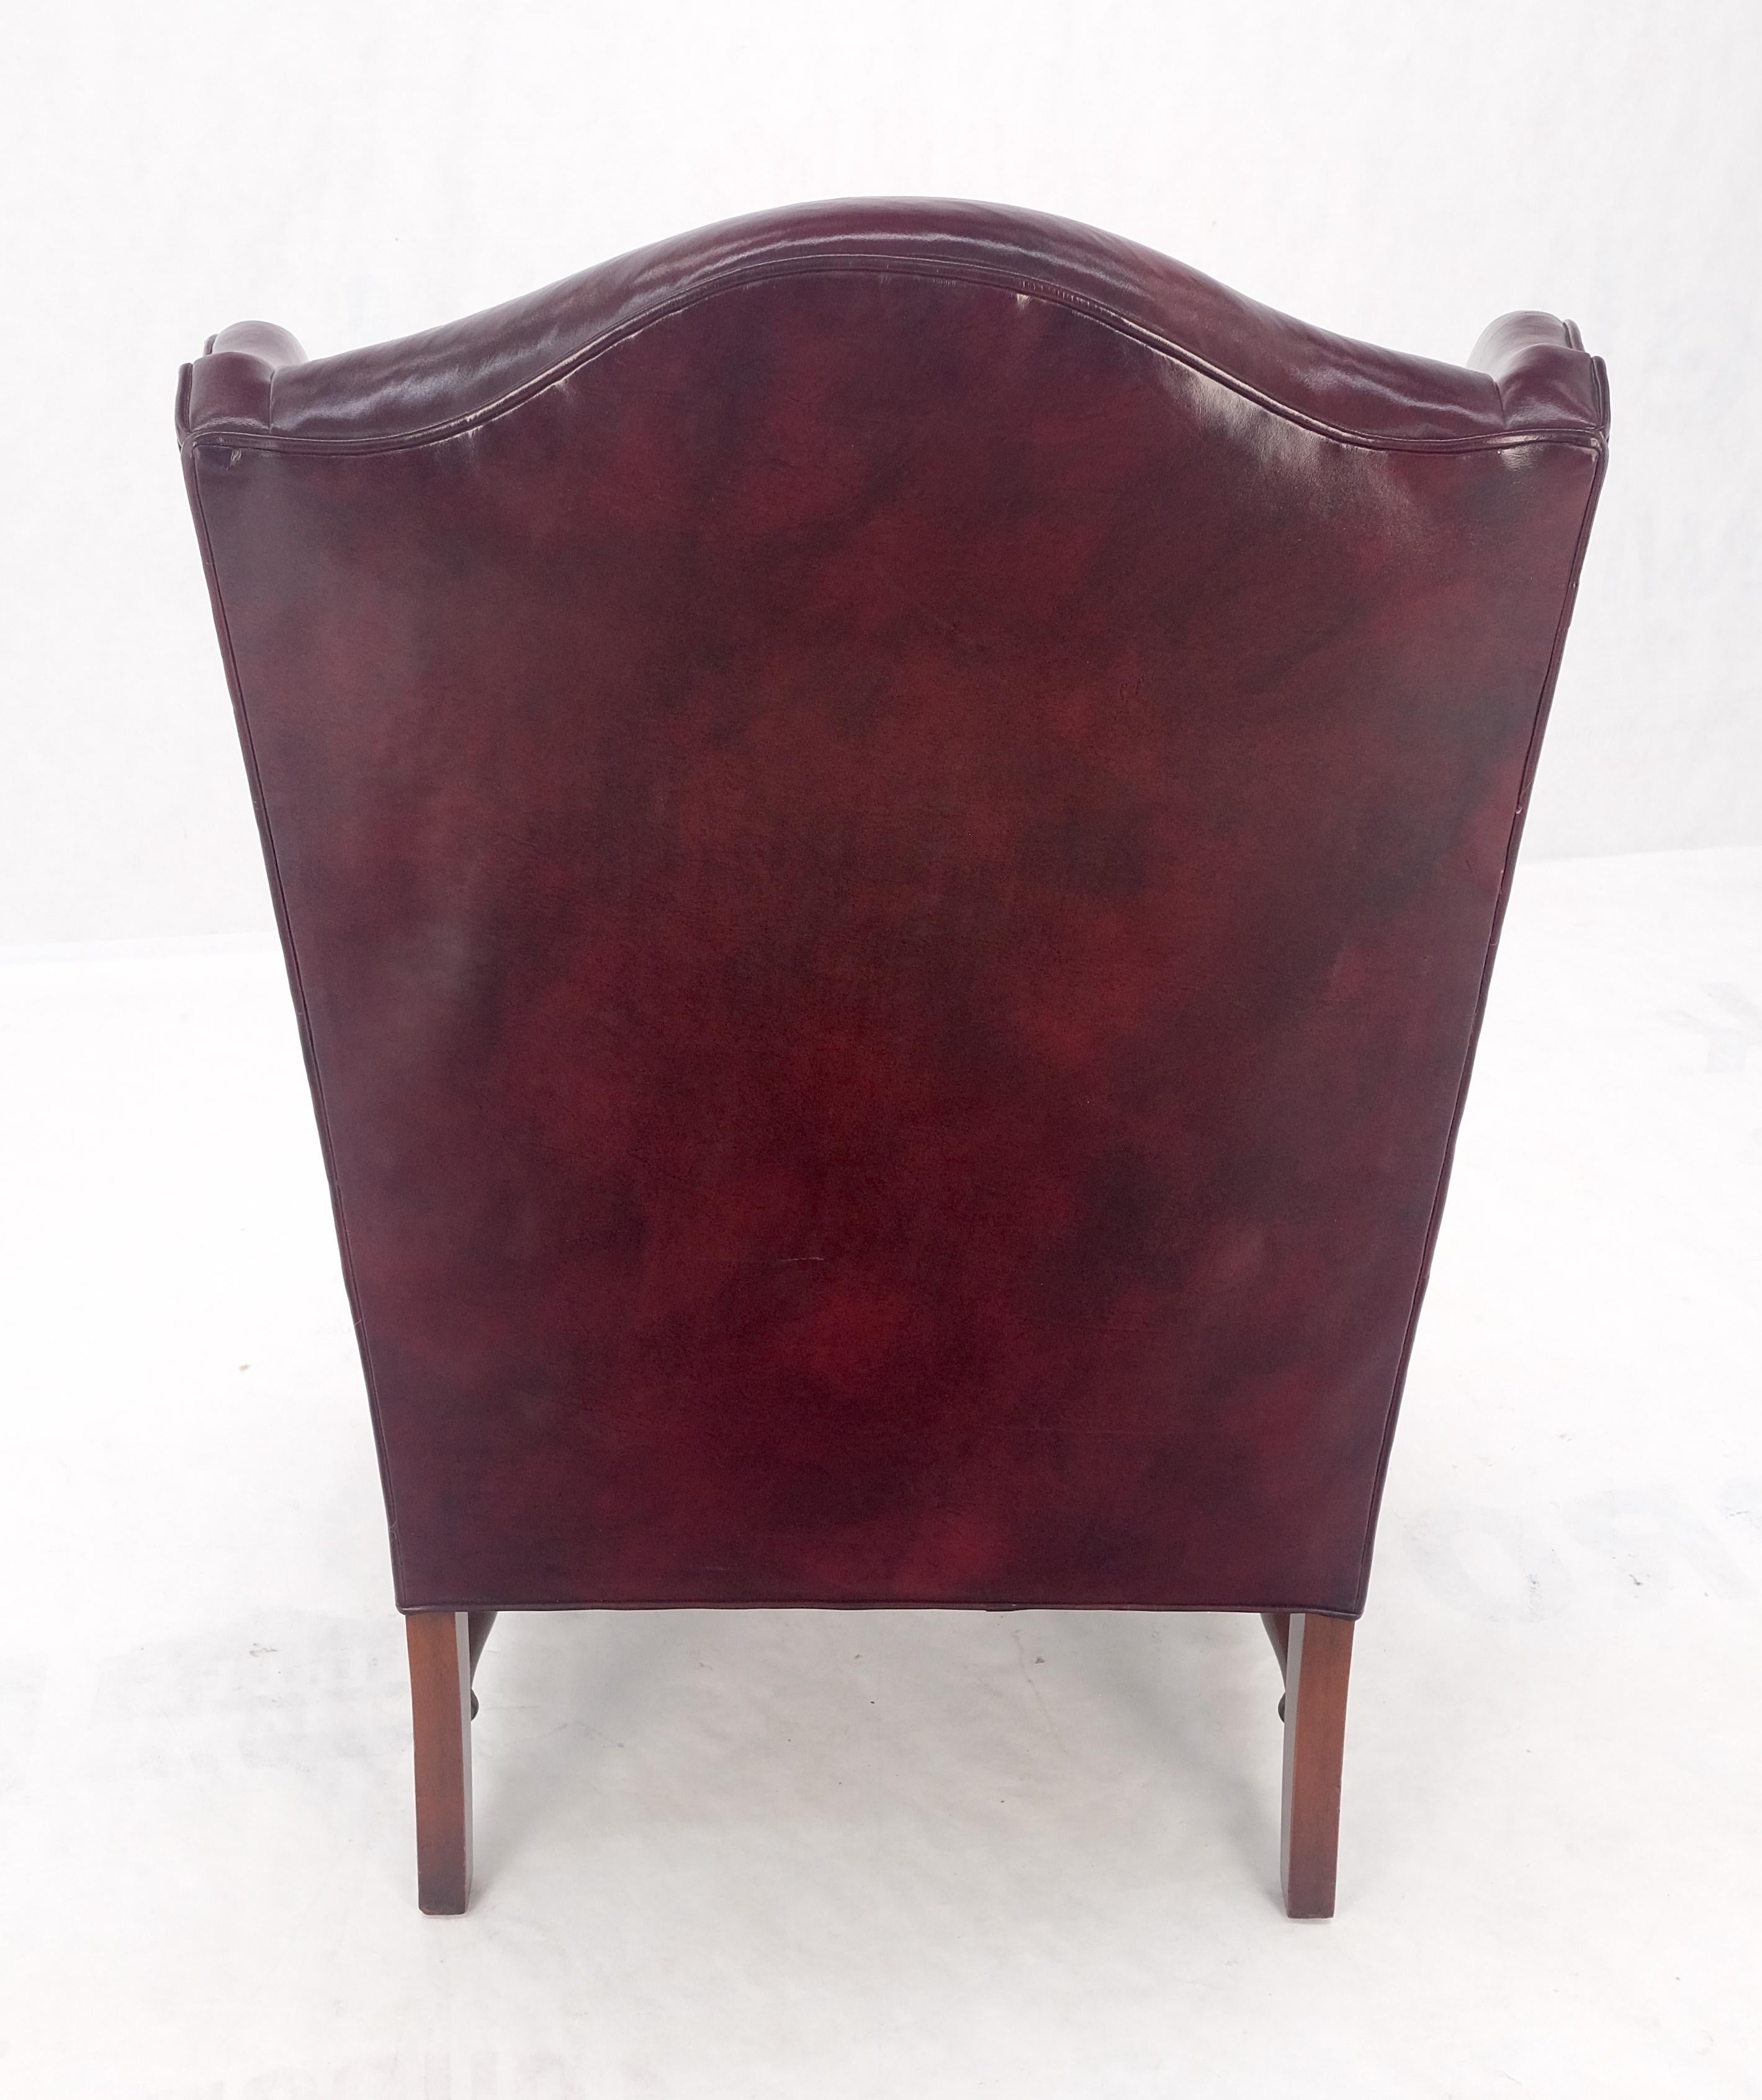 Kindel Burgundy Leather Upholstery Carved Mahogany Legs Wingback Chair & Ottoman For Sale 2